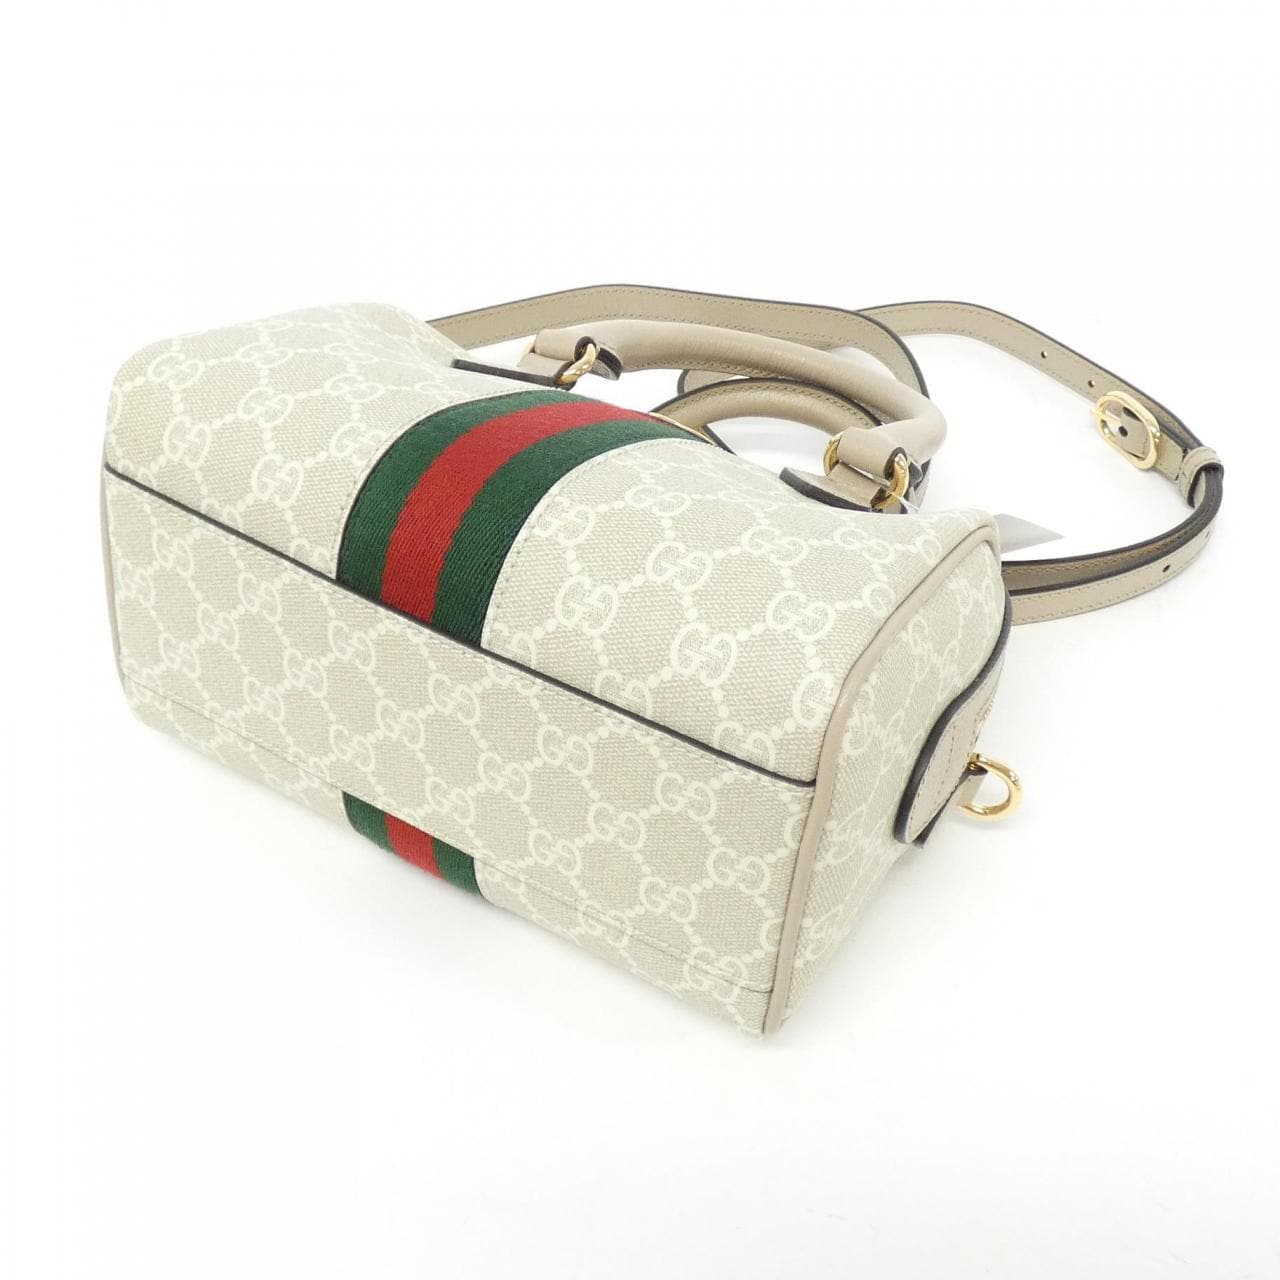 [BRAND NEW] Gucci OPHIDIA 772053 UULAG bag